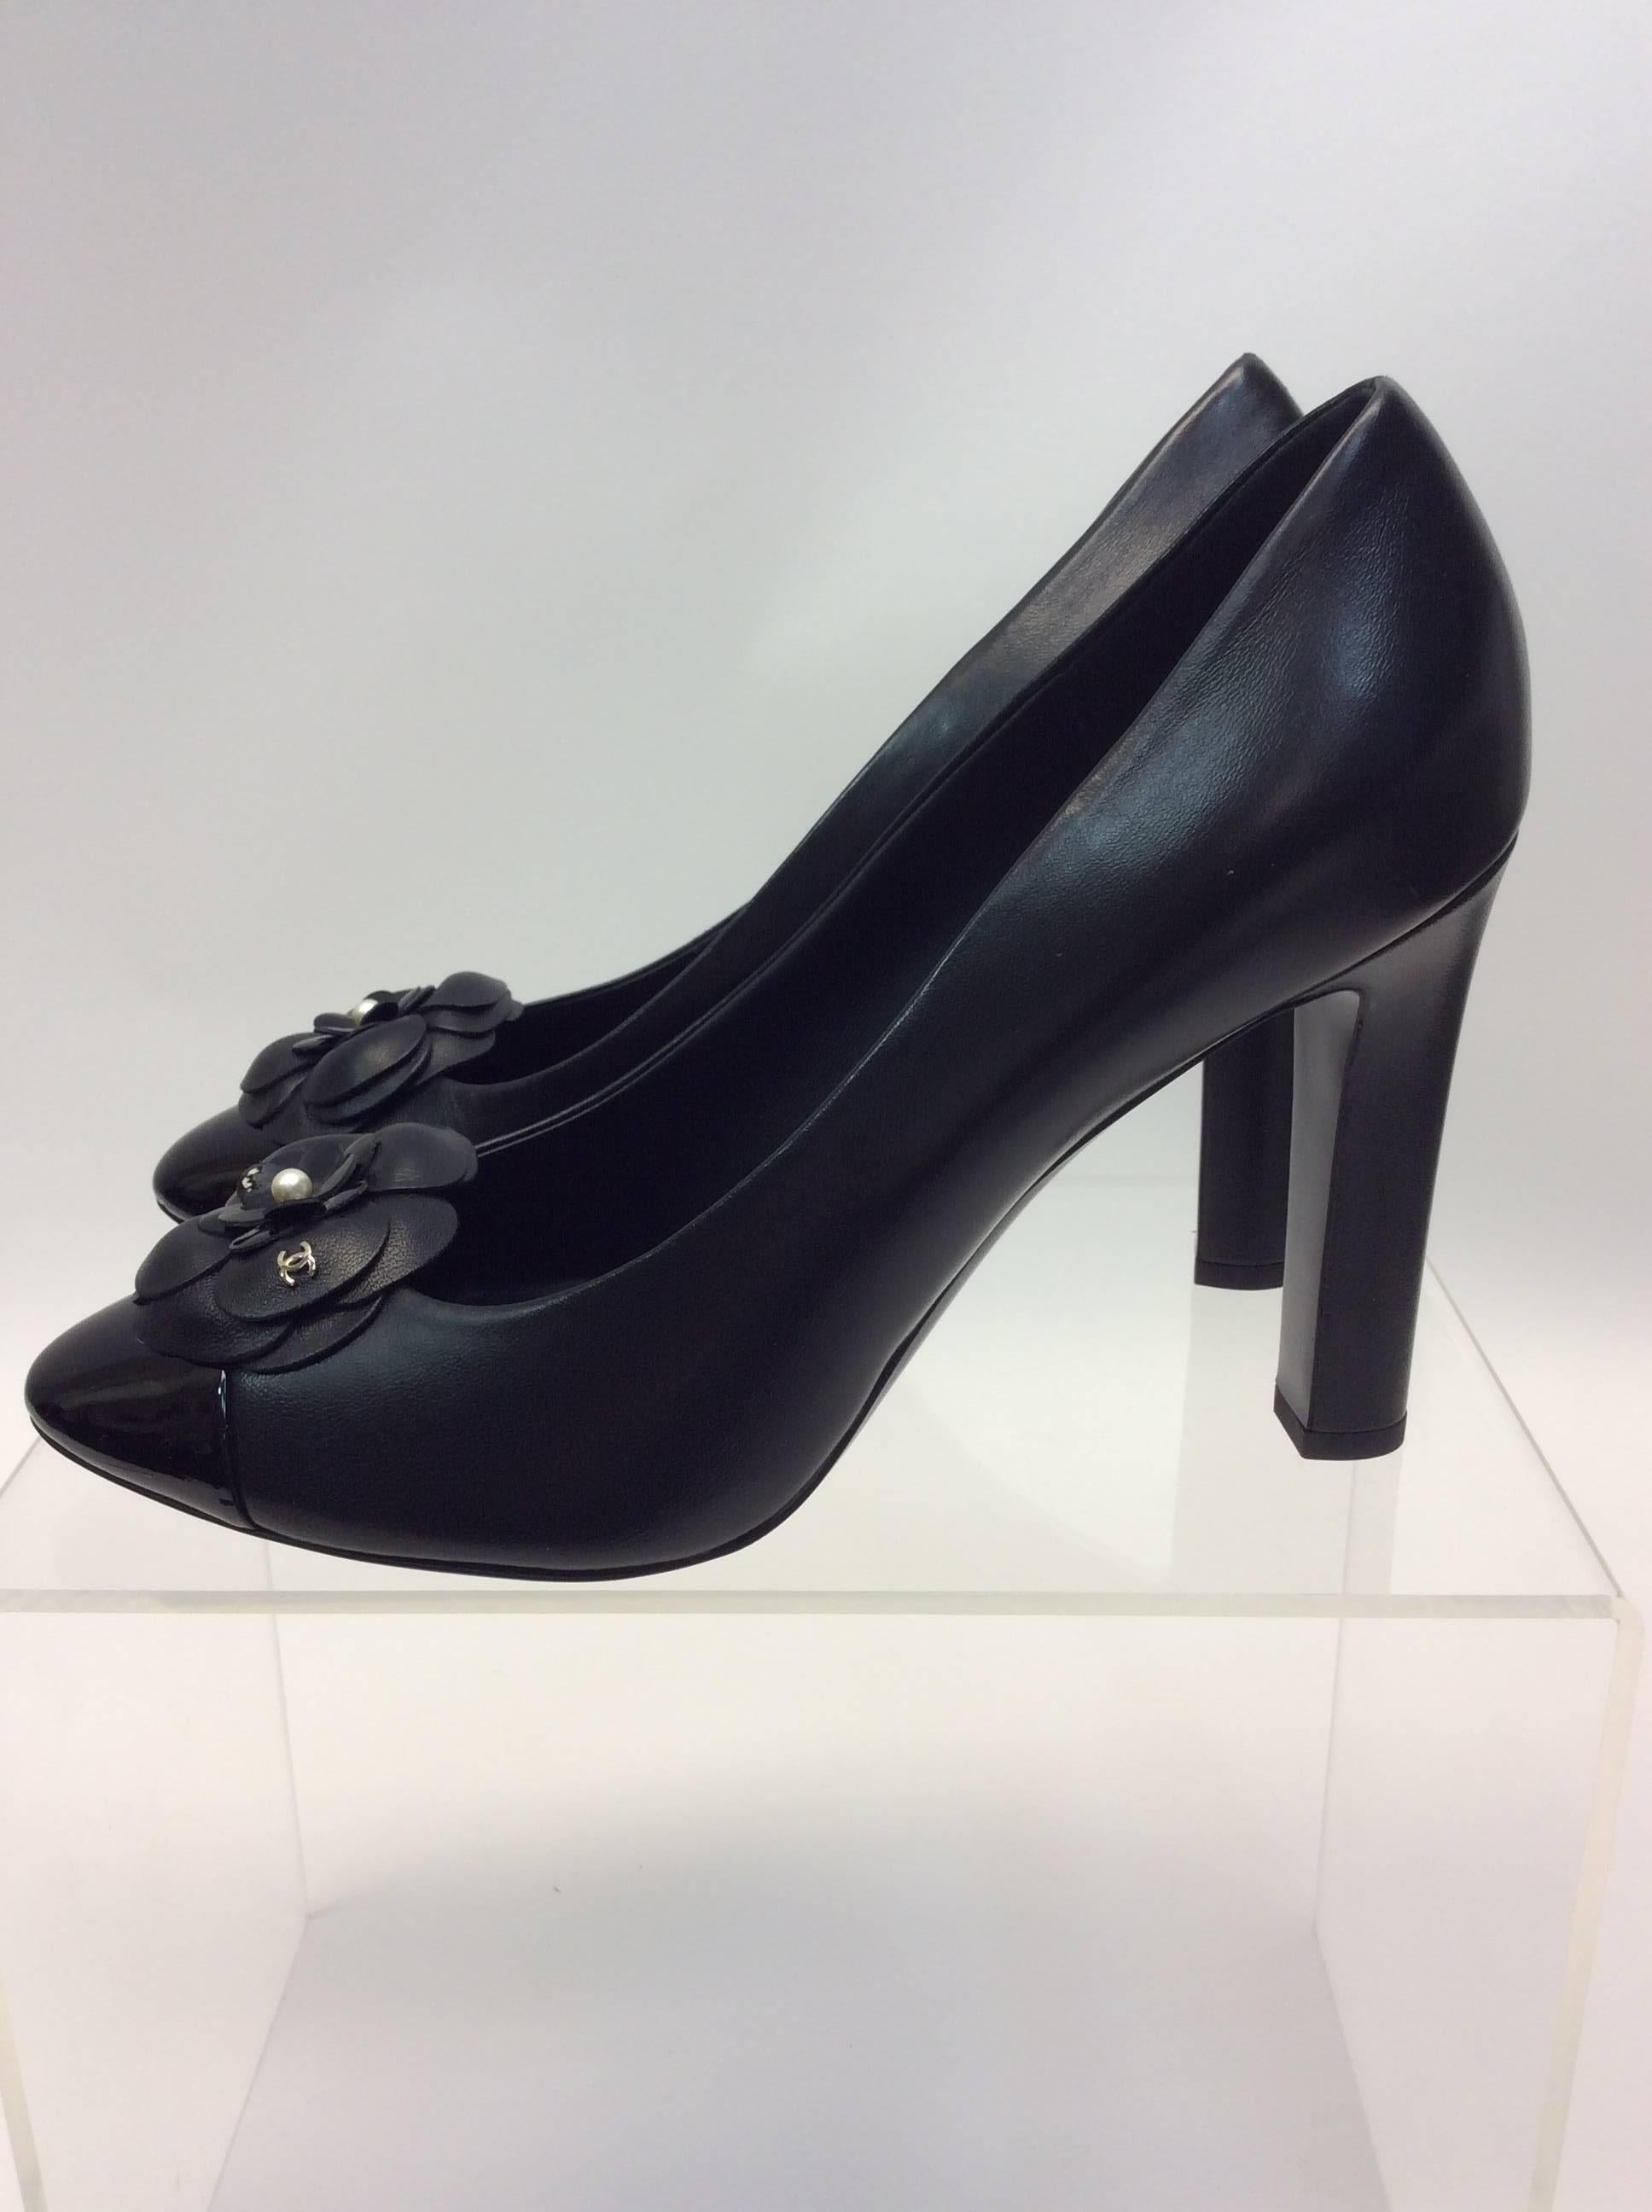 Chanel Black Leather Pump
Flower Detail
$695
4 inch heel
Size 39.5
Made in Italy